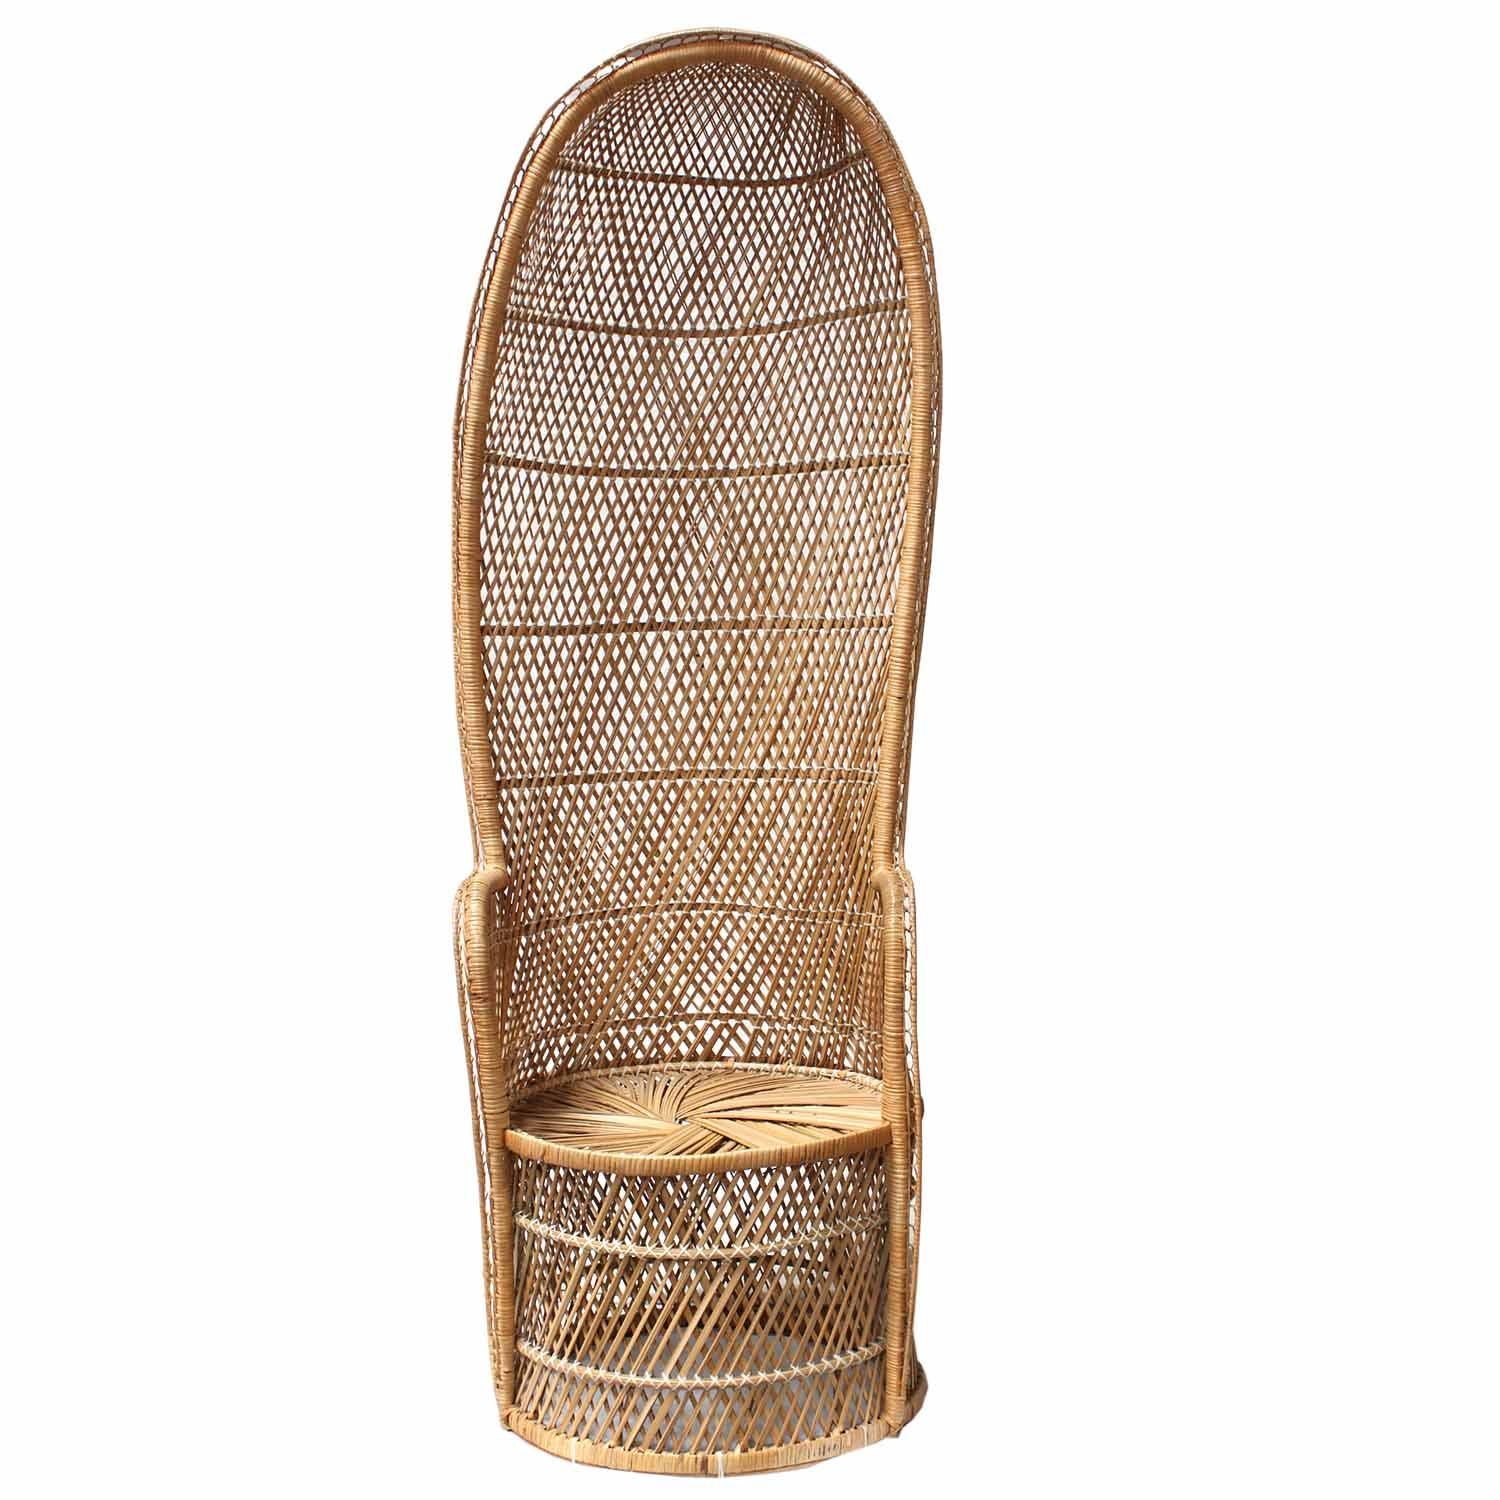 A rattan wicker throne made in the Philippines with a seat height of 15